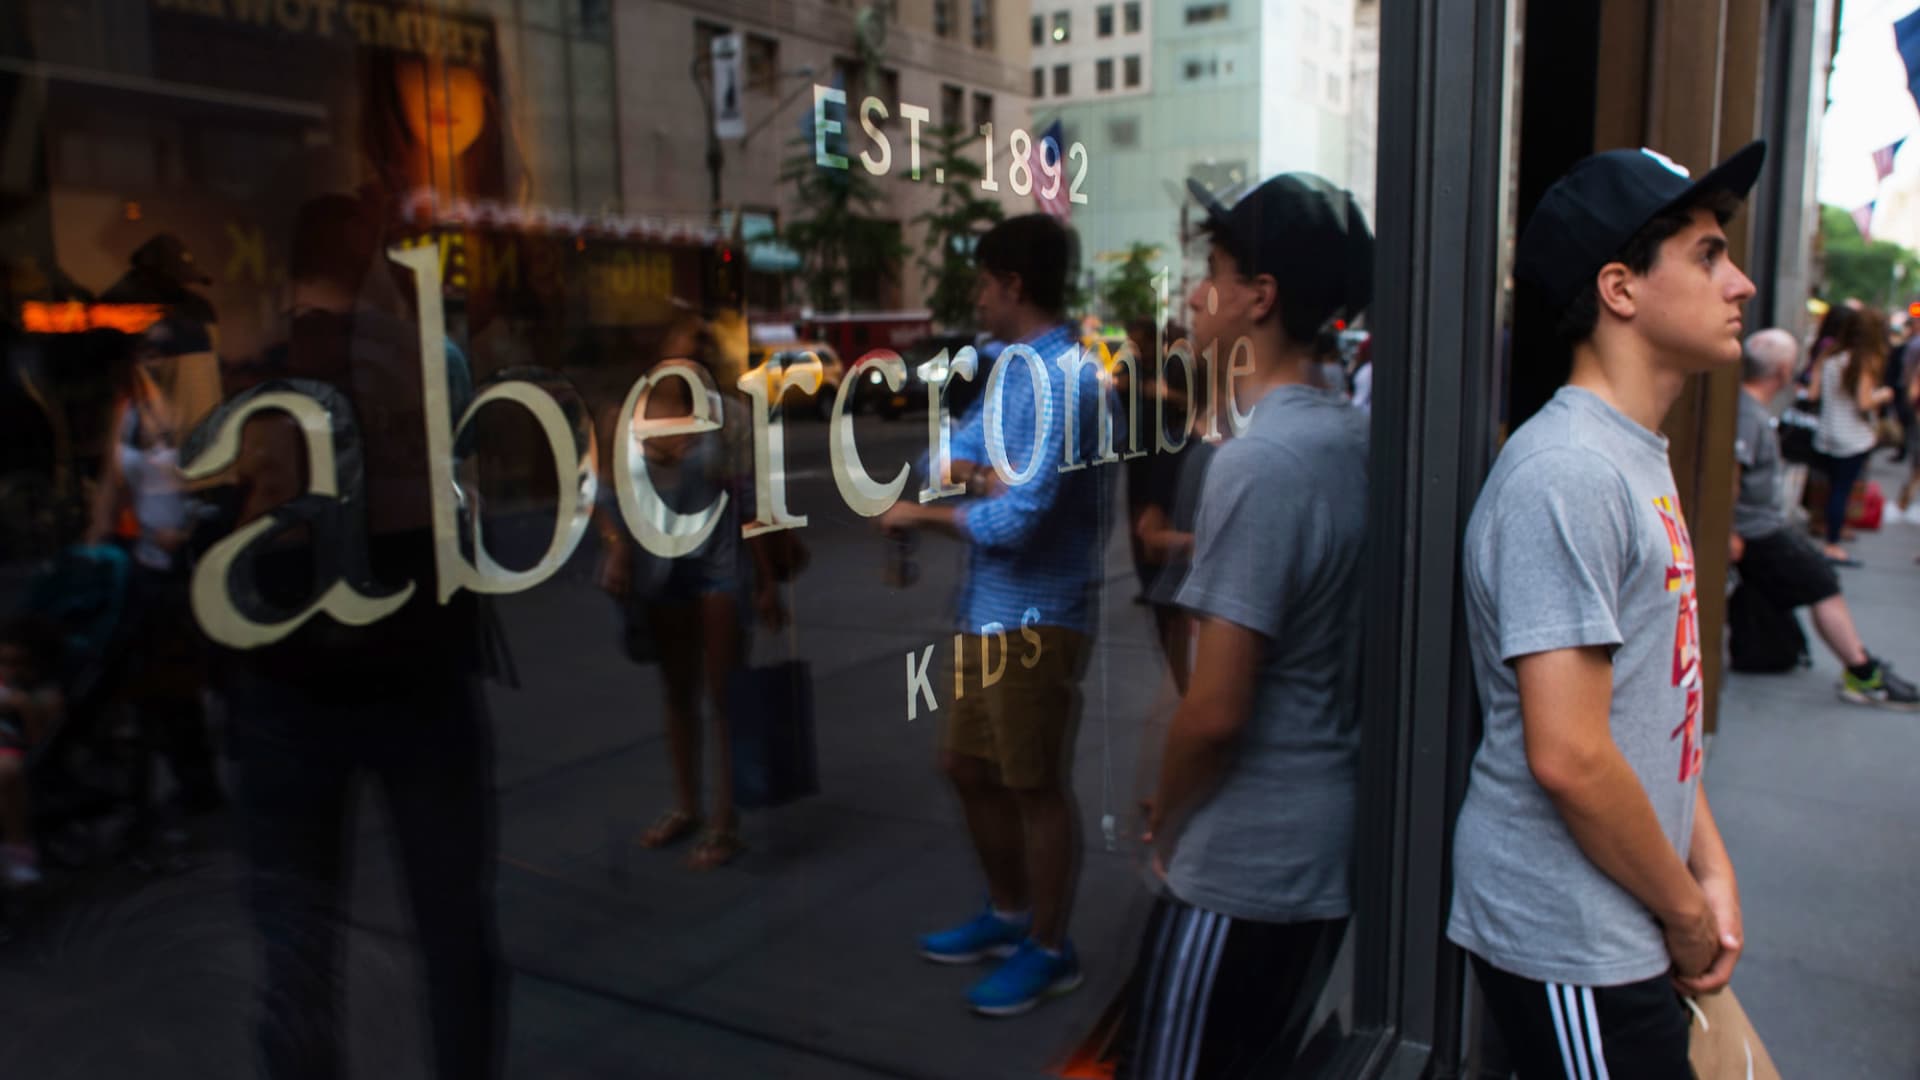 Stocks making the biggest moves midday: Abercrombie & Fitch, Disney, Best Buy, Zoom and more